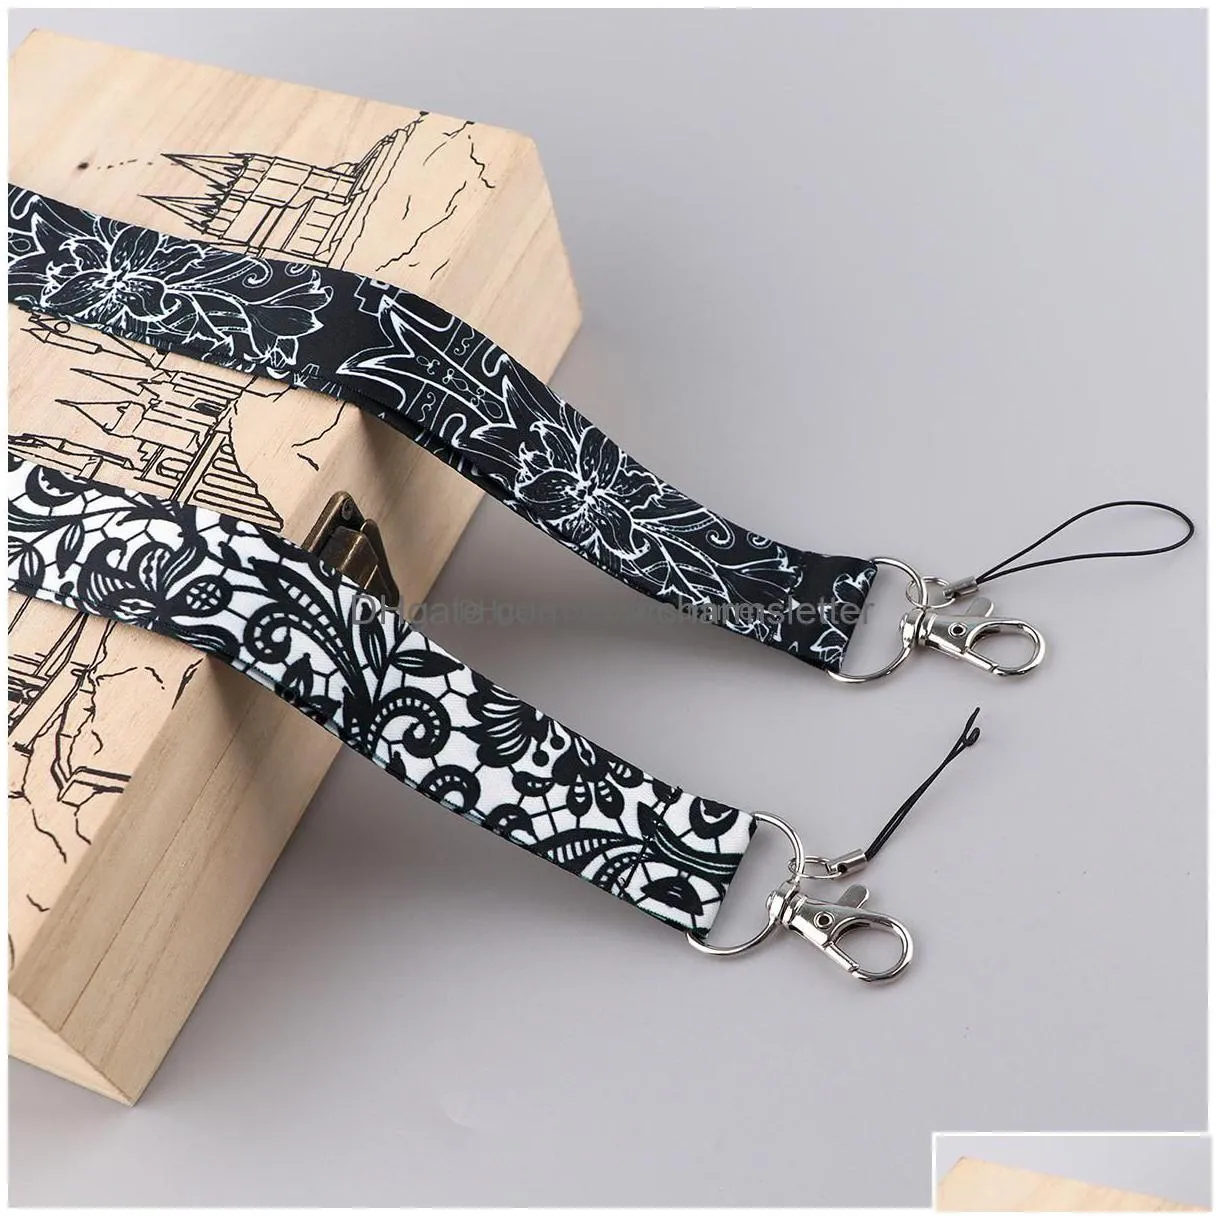 shoe parts accessories cat and dog vintage sun moon lanyards for key neck strap card badge gym keychain lanyard holder diy hanging r